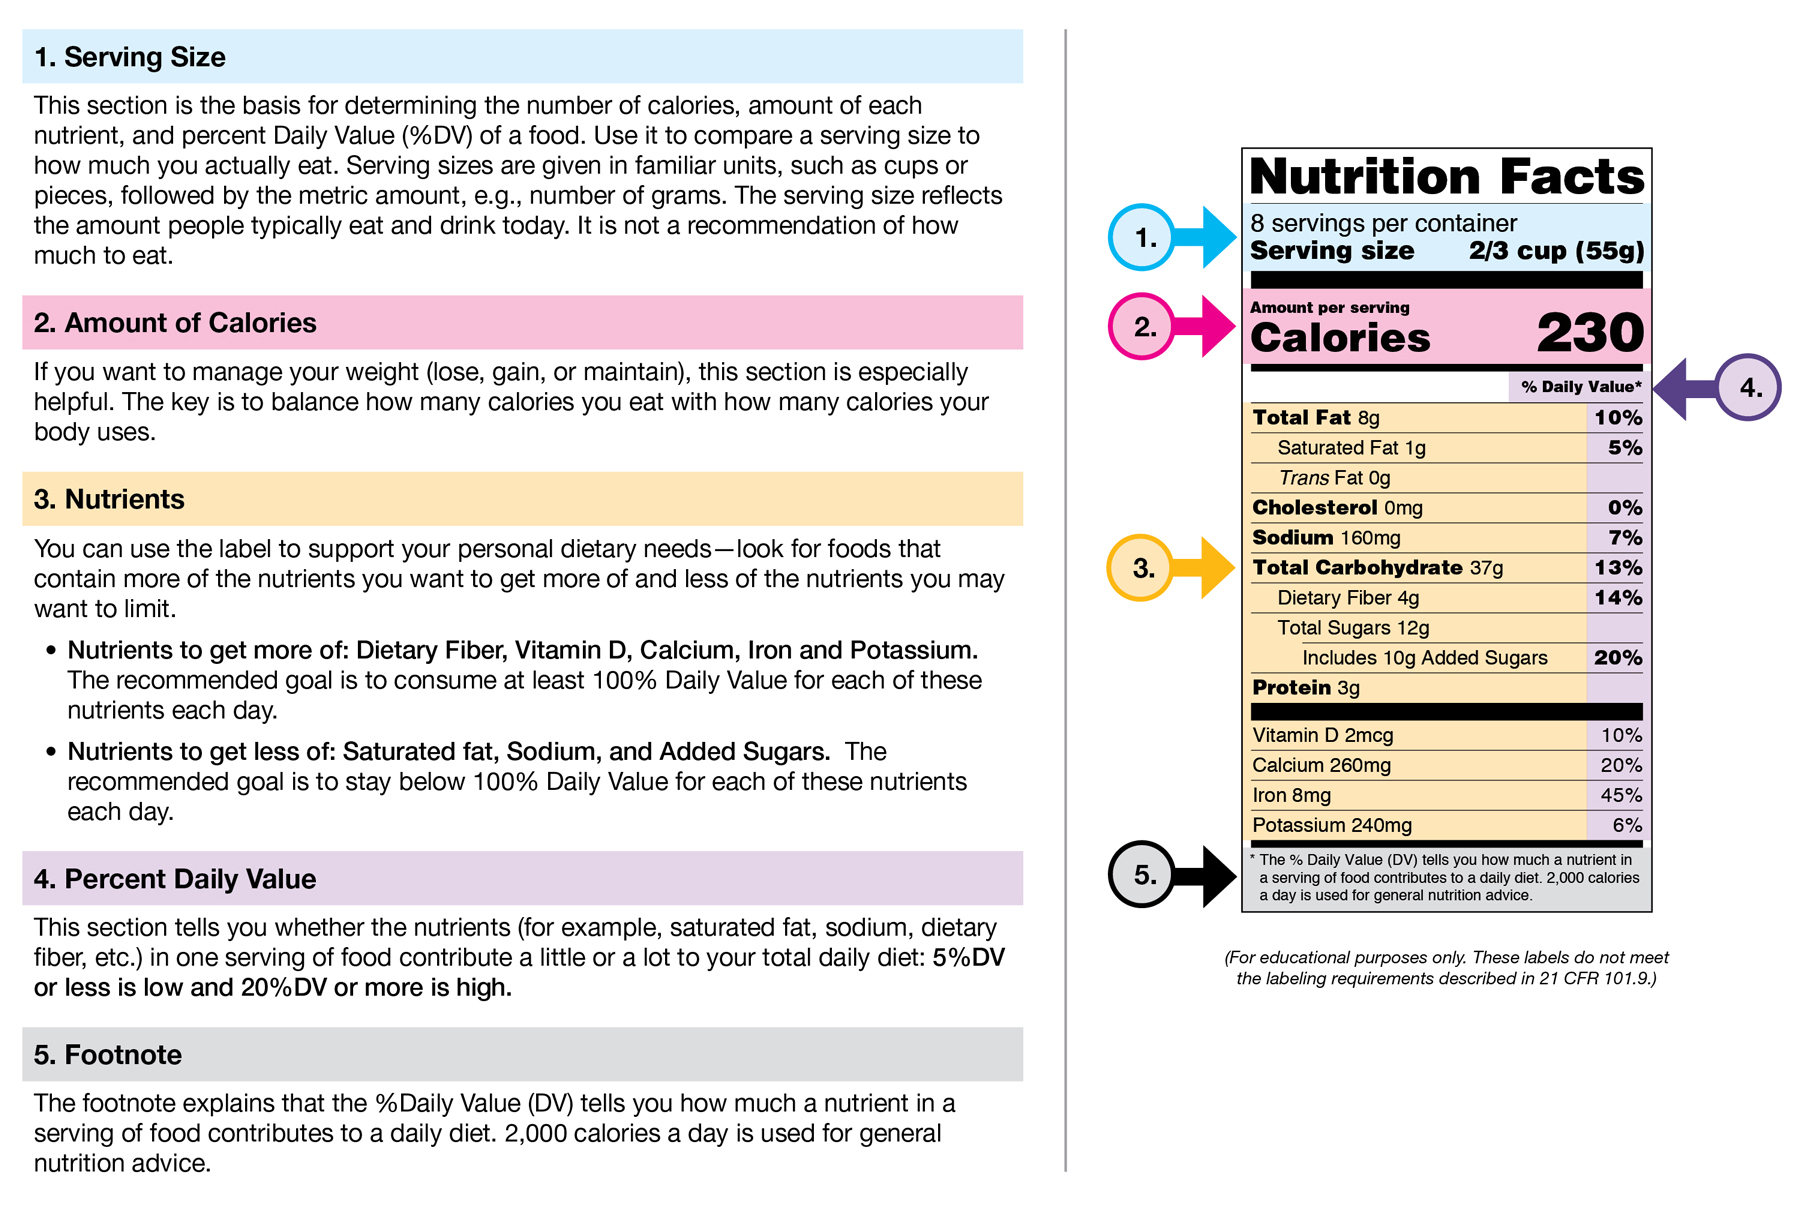 Nutrition Facts Label Images For Download | Fda Intended For Nutrition Label Template Word